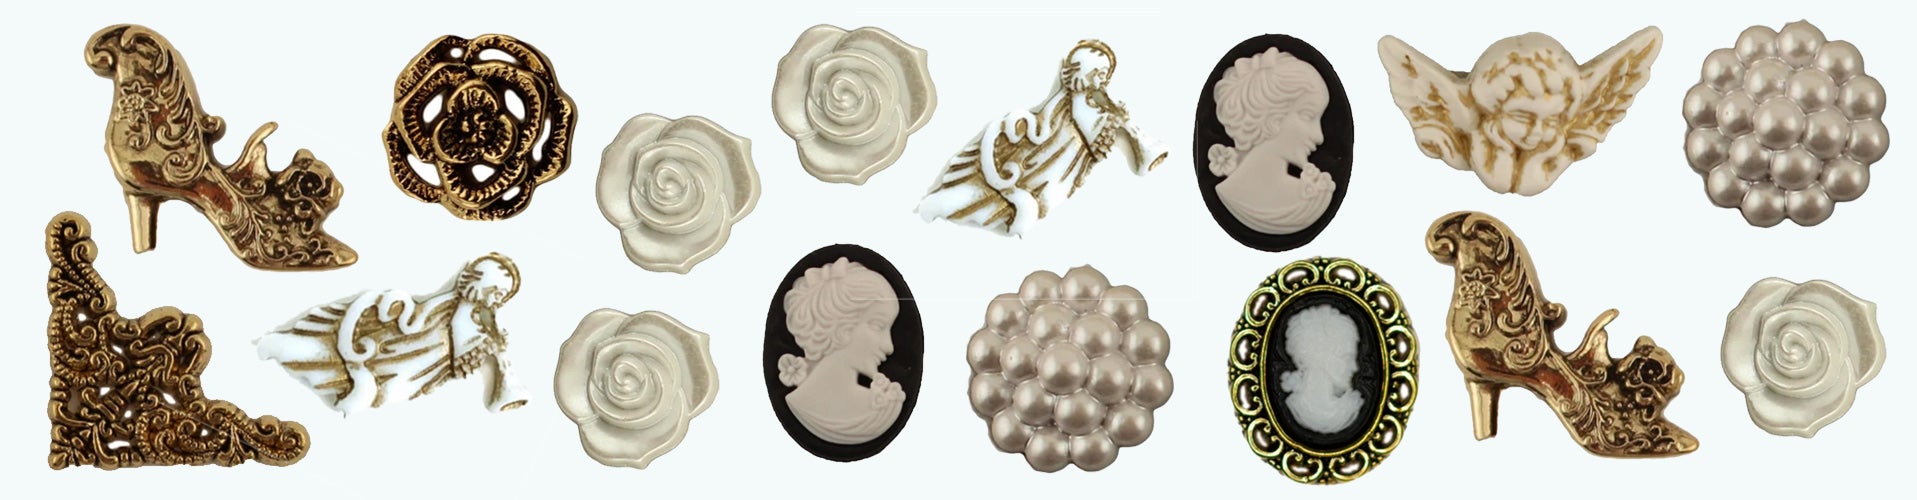 Victorian Theme Buttons | Buttons Galore and More